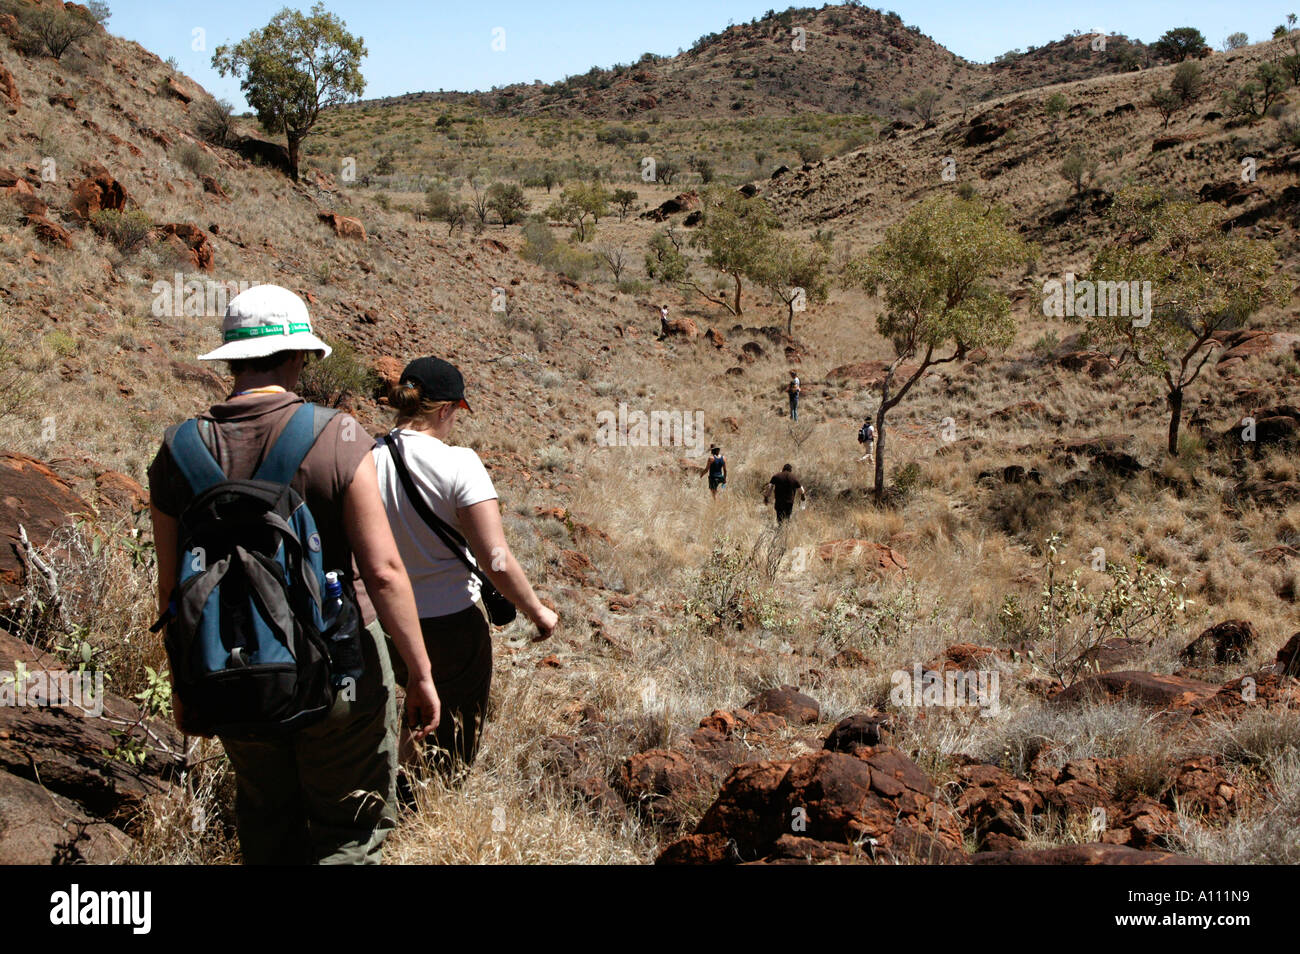 Holidaymakers trek through hills as part of an aboriginal holiday in the Red Centre Anangu Pitjantjara lands South Australia Stock Photo